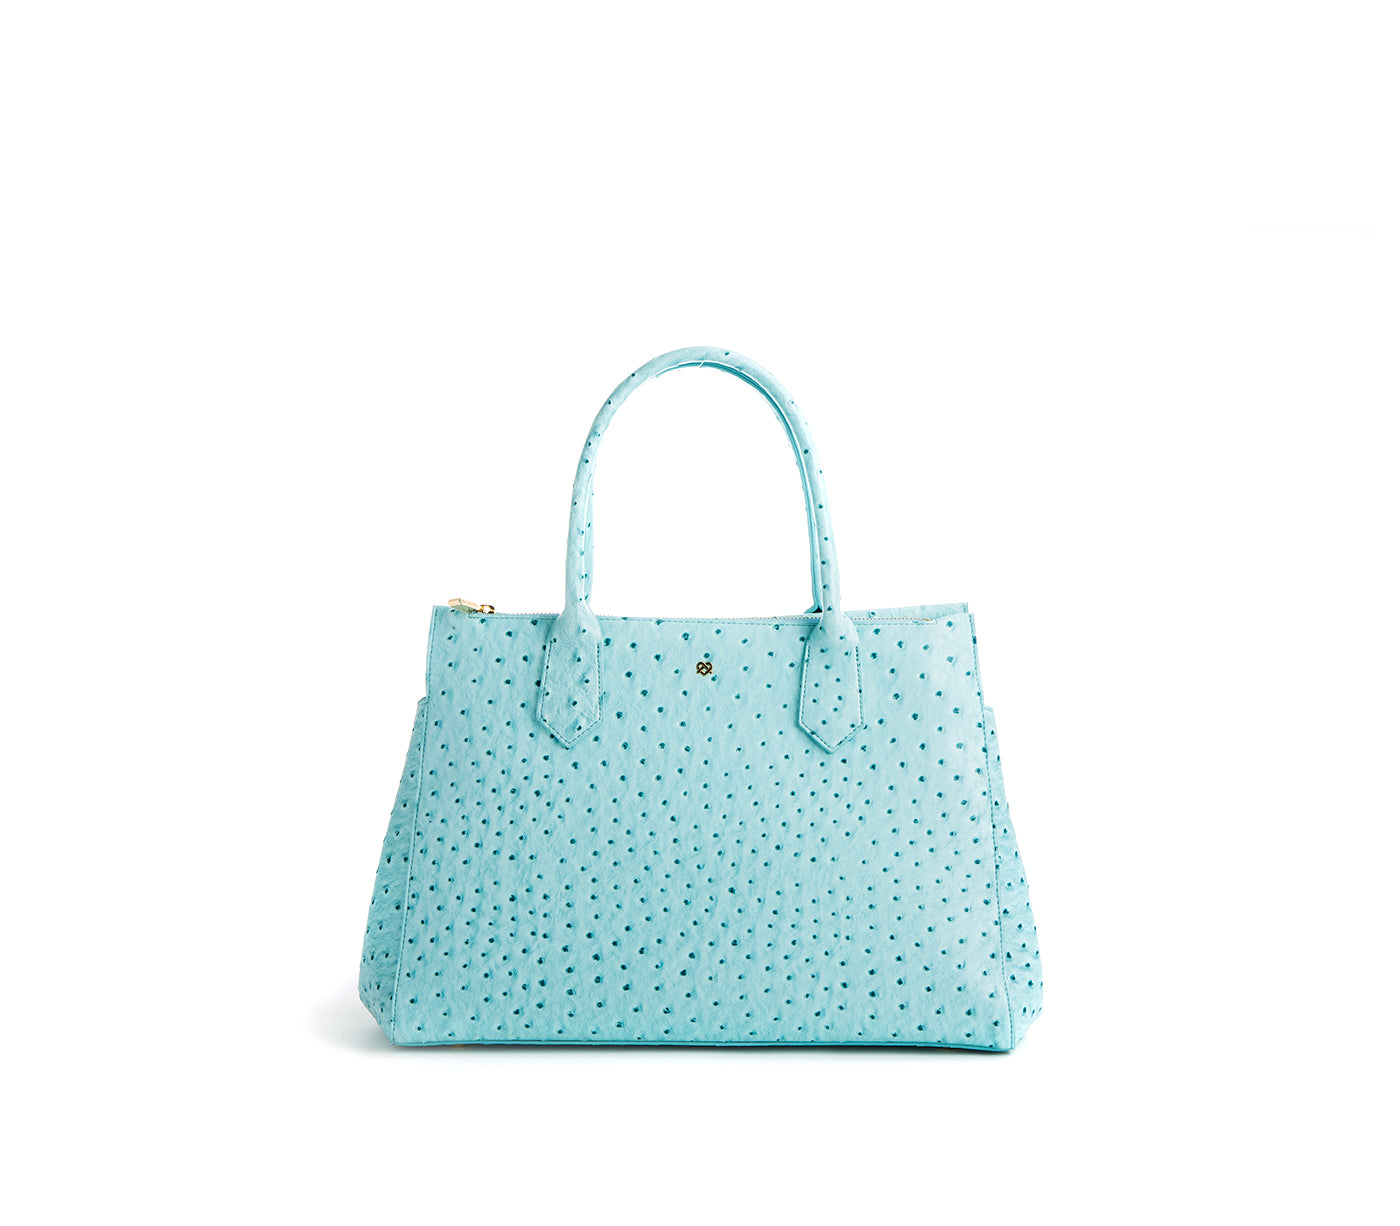 New in Dust Bag V Couture by Kooba Turquoise Vegan Leather Bag